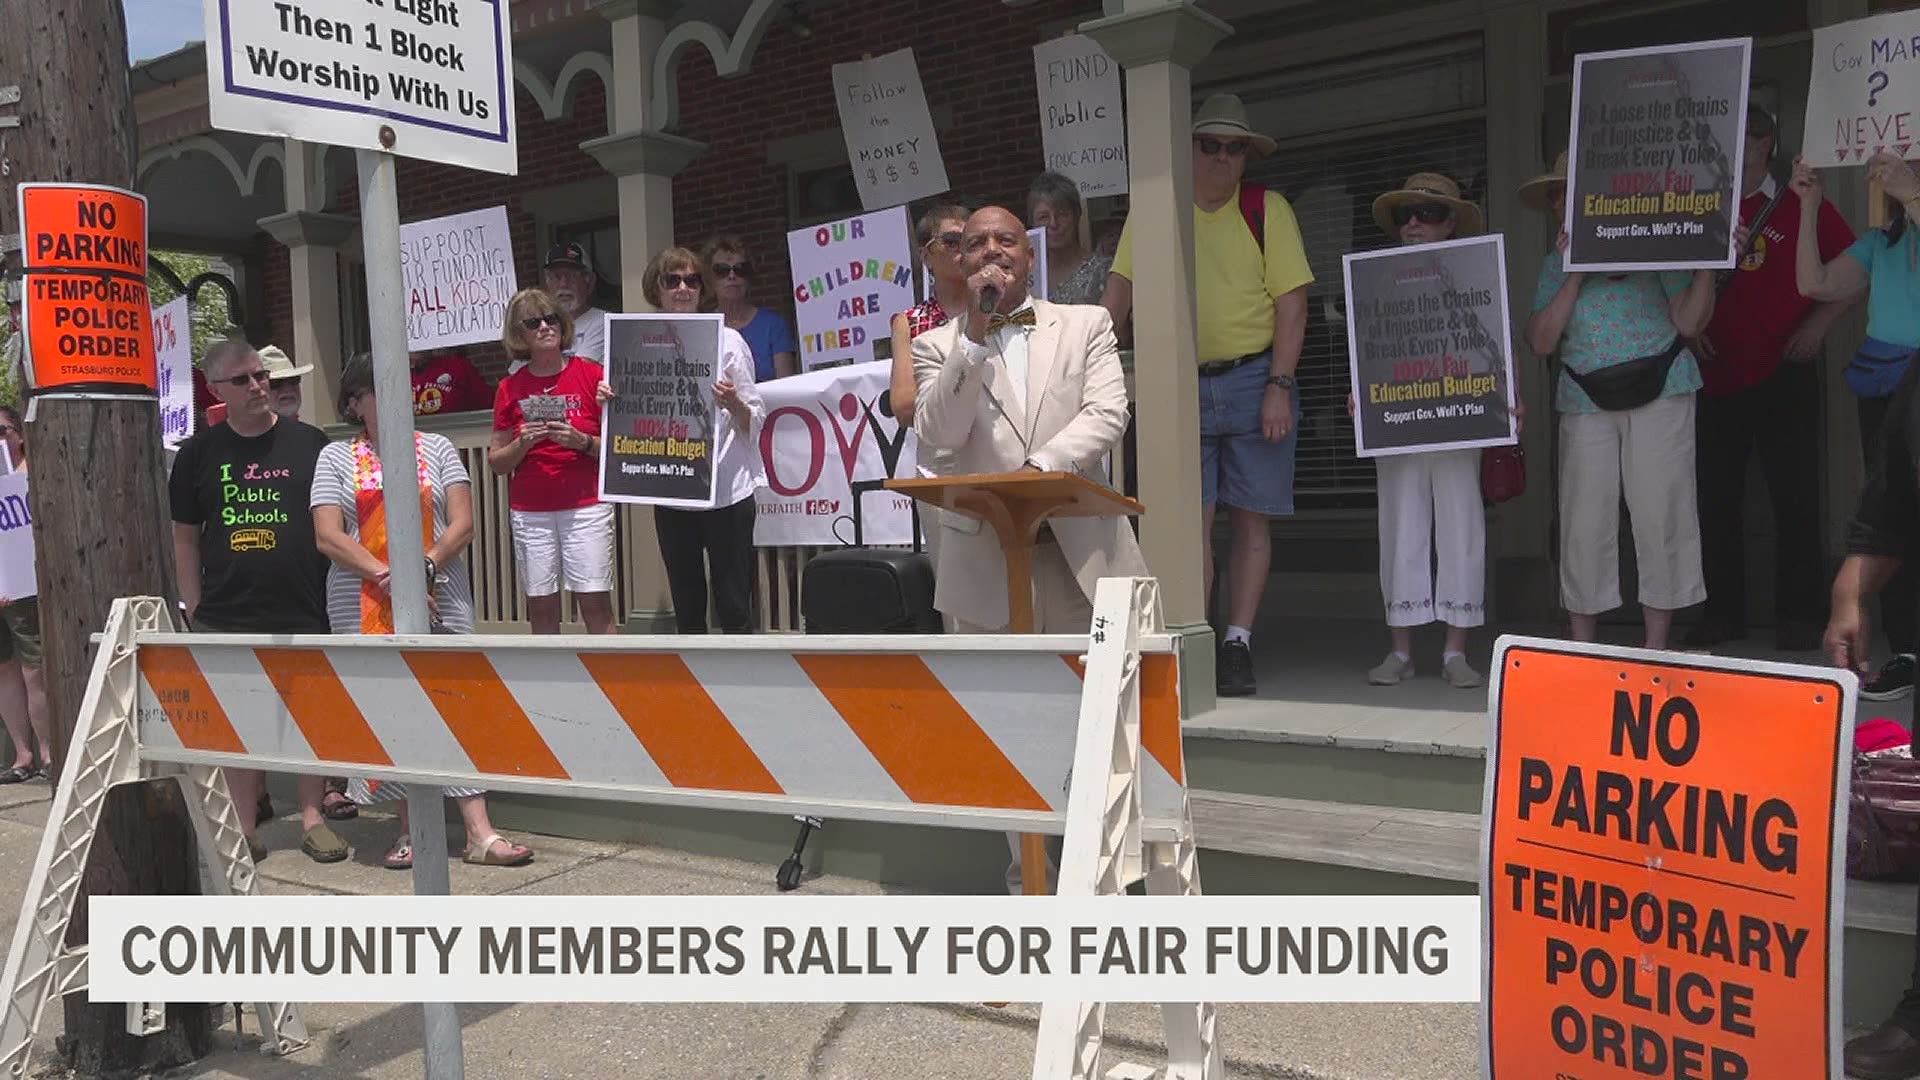 Community members visited Sen. Martin's office in Strasburg and asked the lawmaker to support fair funding for PA public schools. He says he already does.